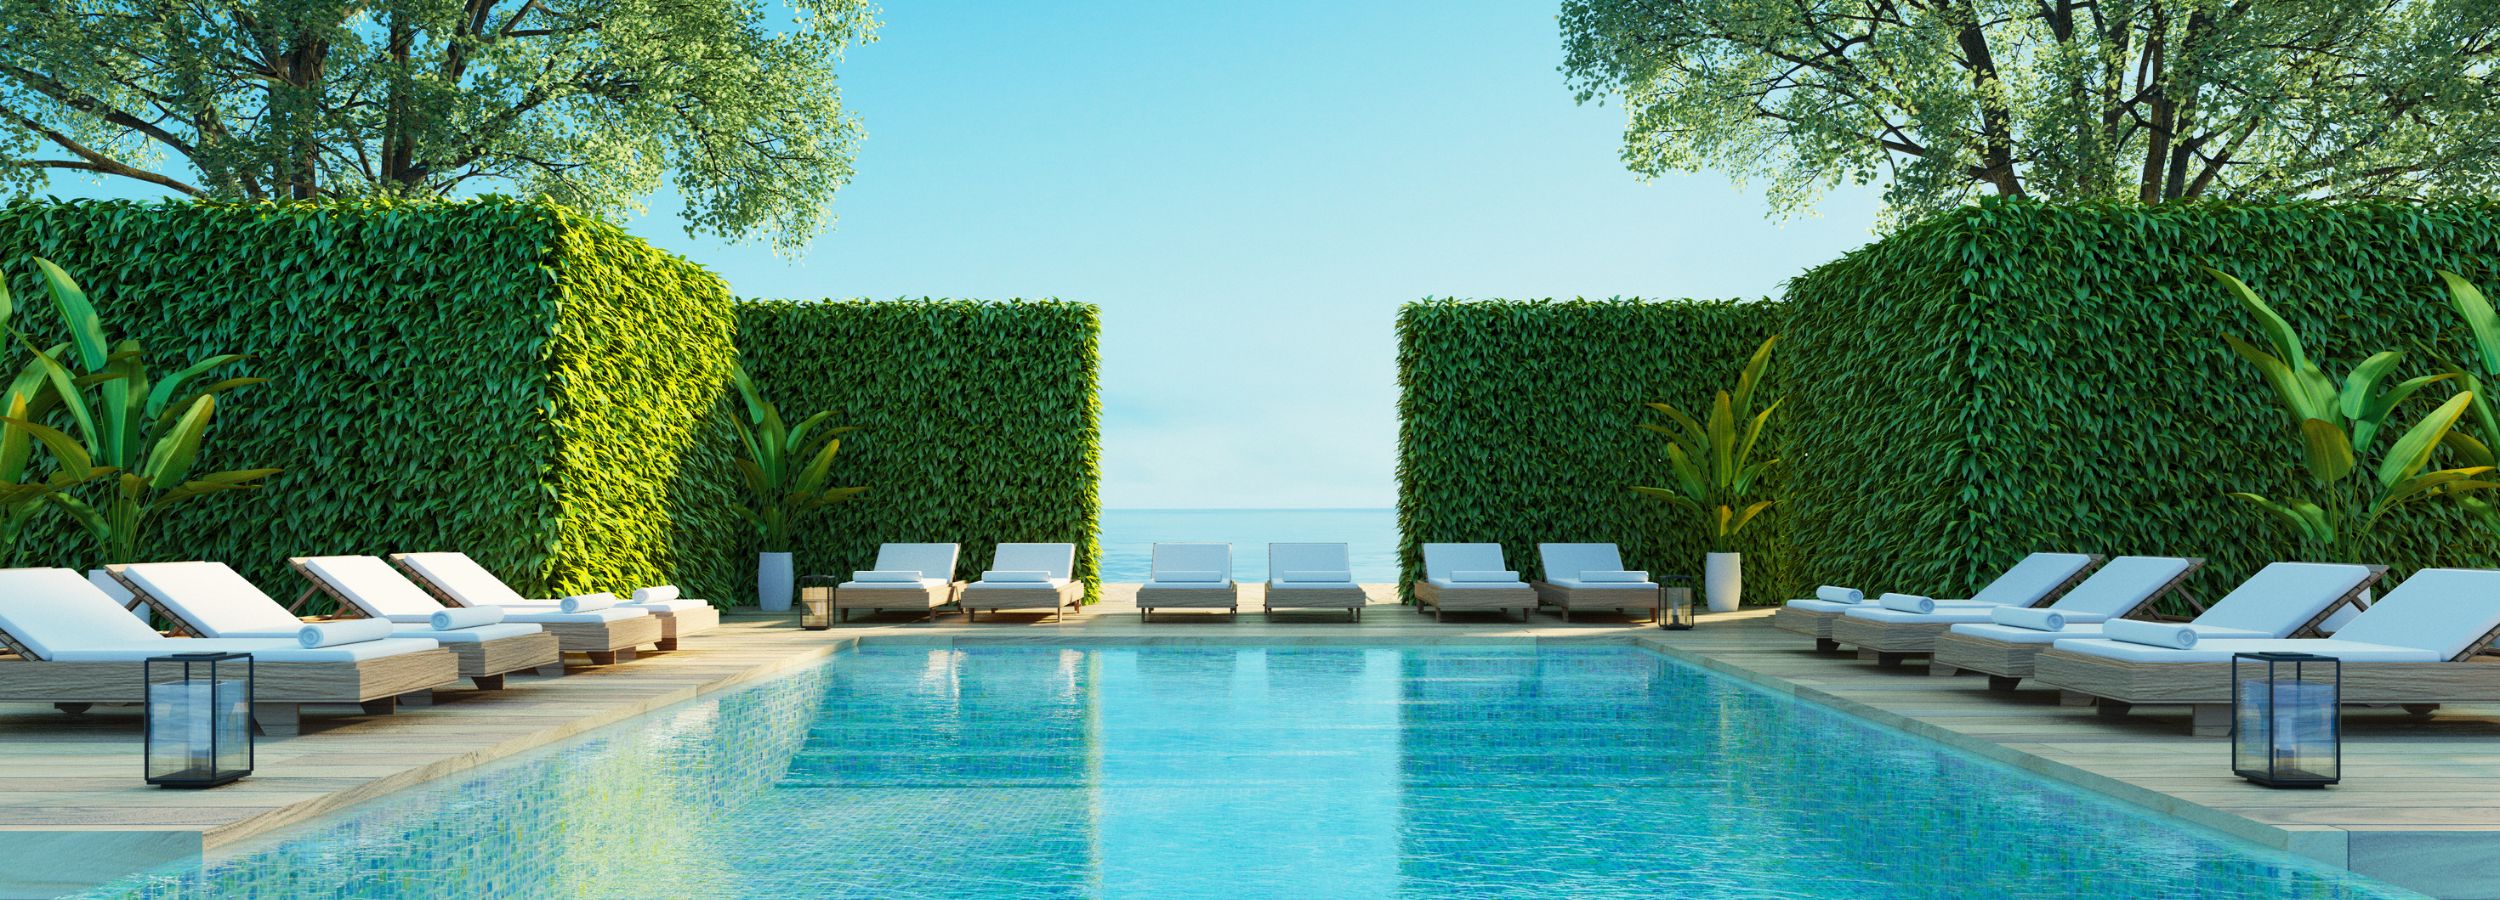 Luxury sea view pool with modern wood poolside lounge chairs.